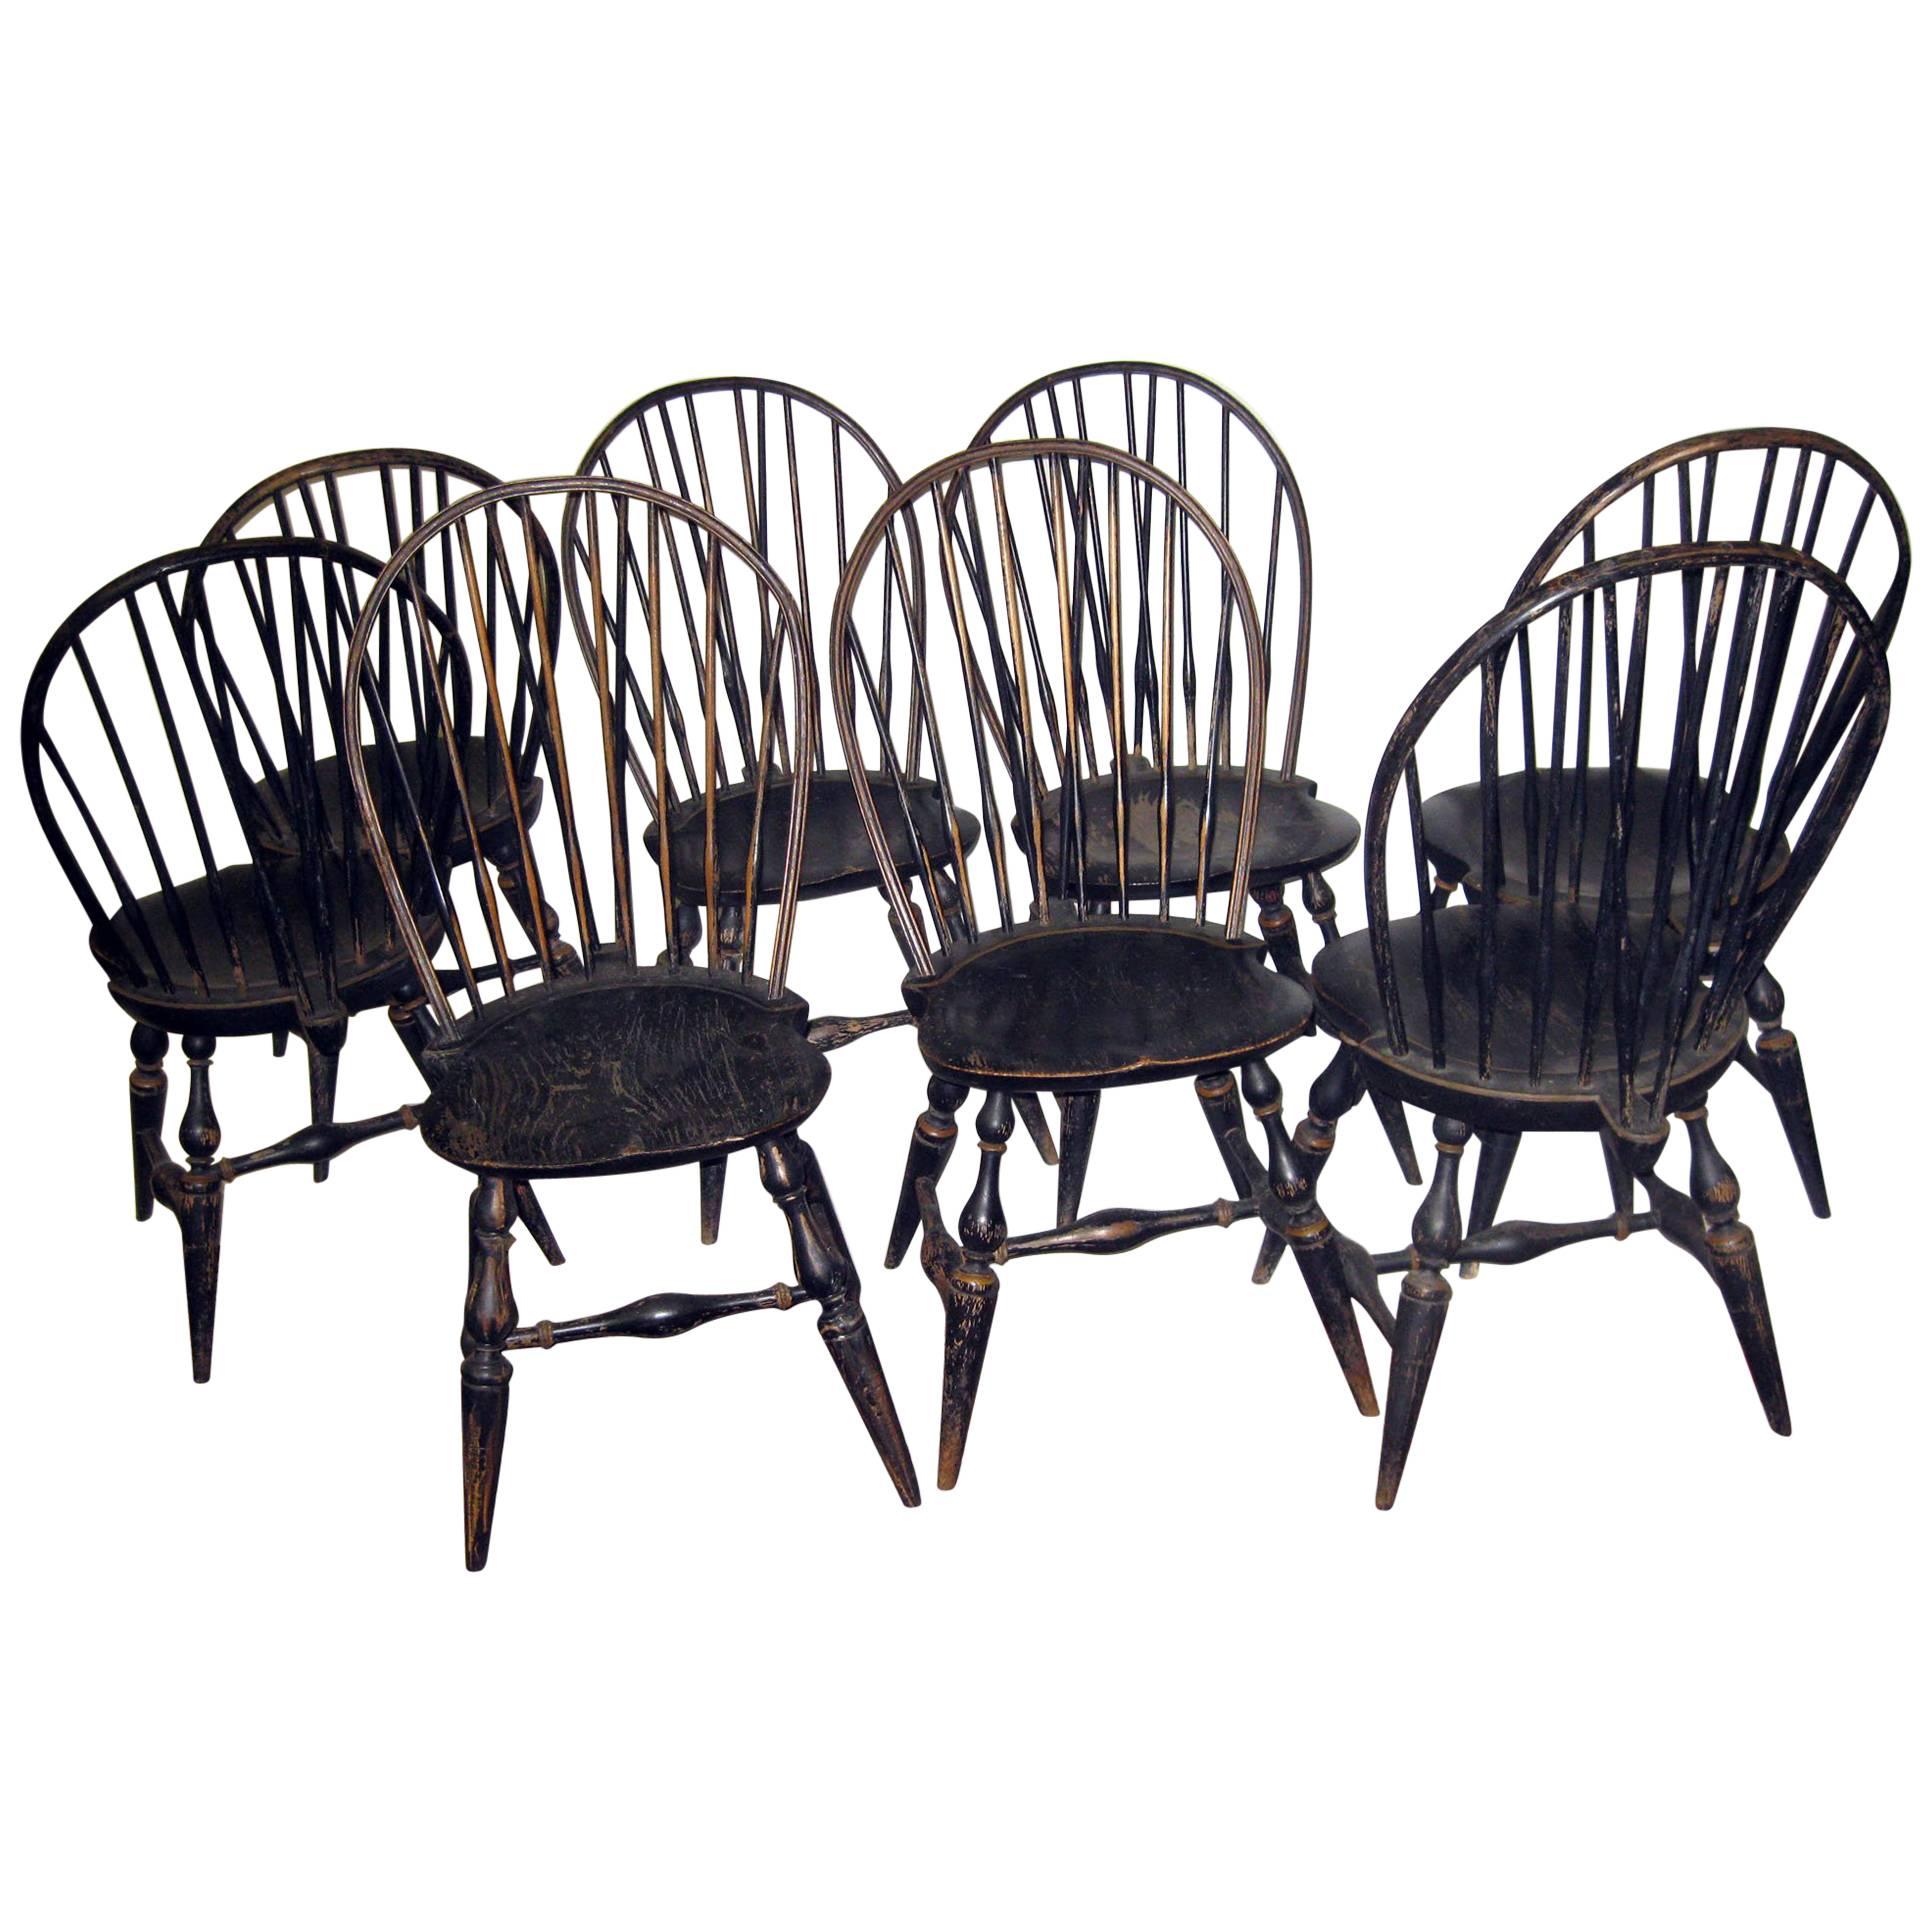 19th Century Set of Eight American Windsor Chairs with Original Paint